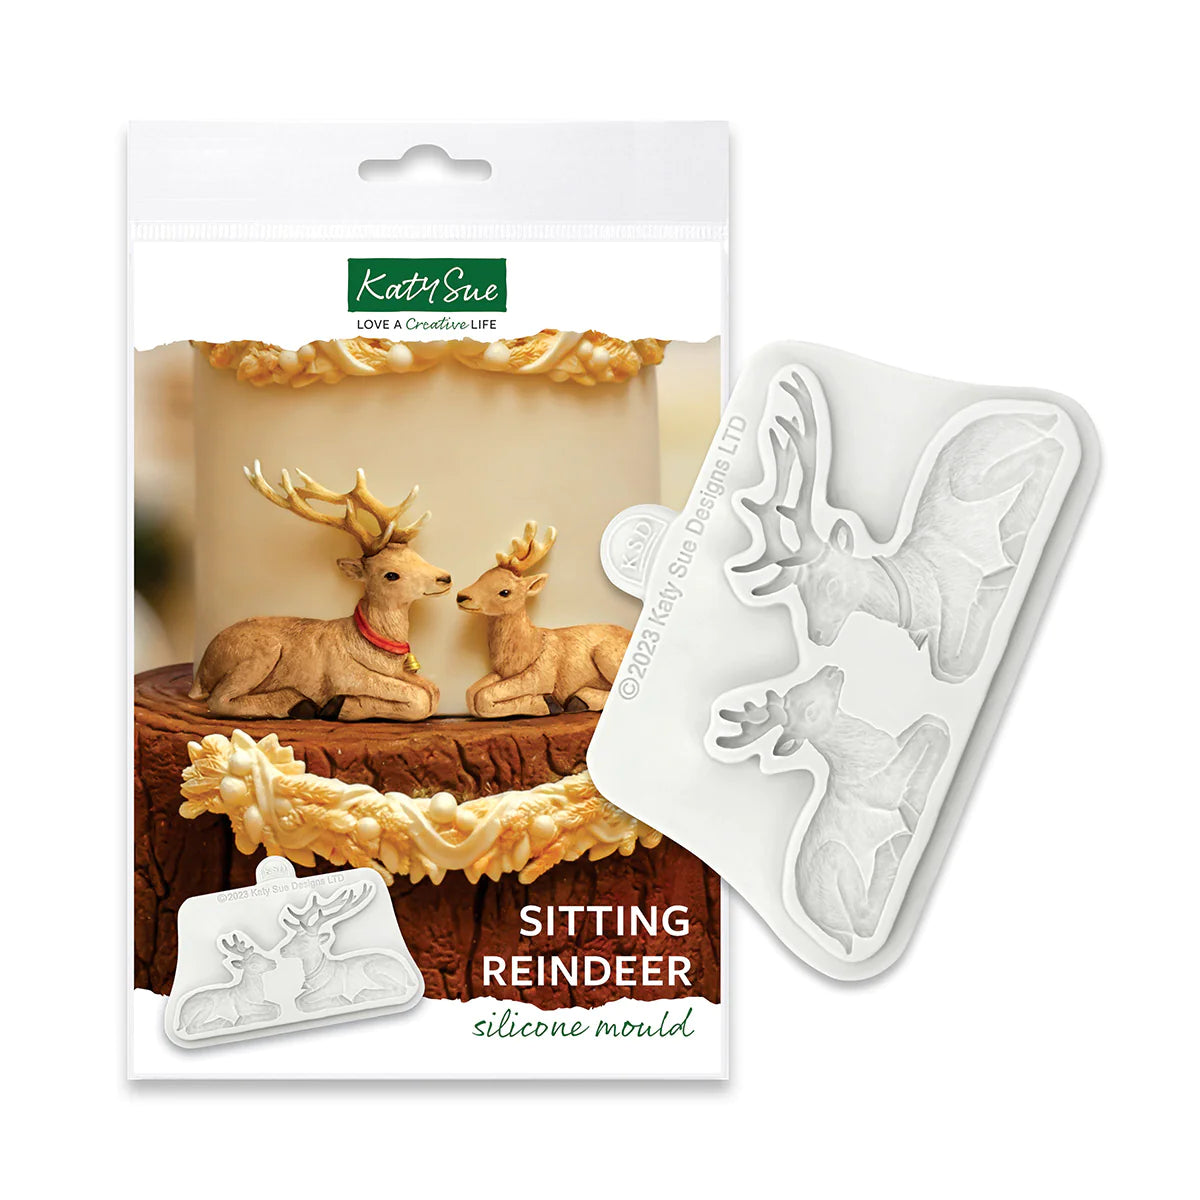 Katy Sue Sitting Reindeer Silicone Mould